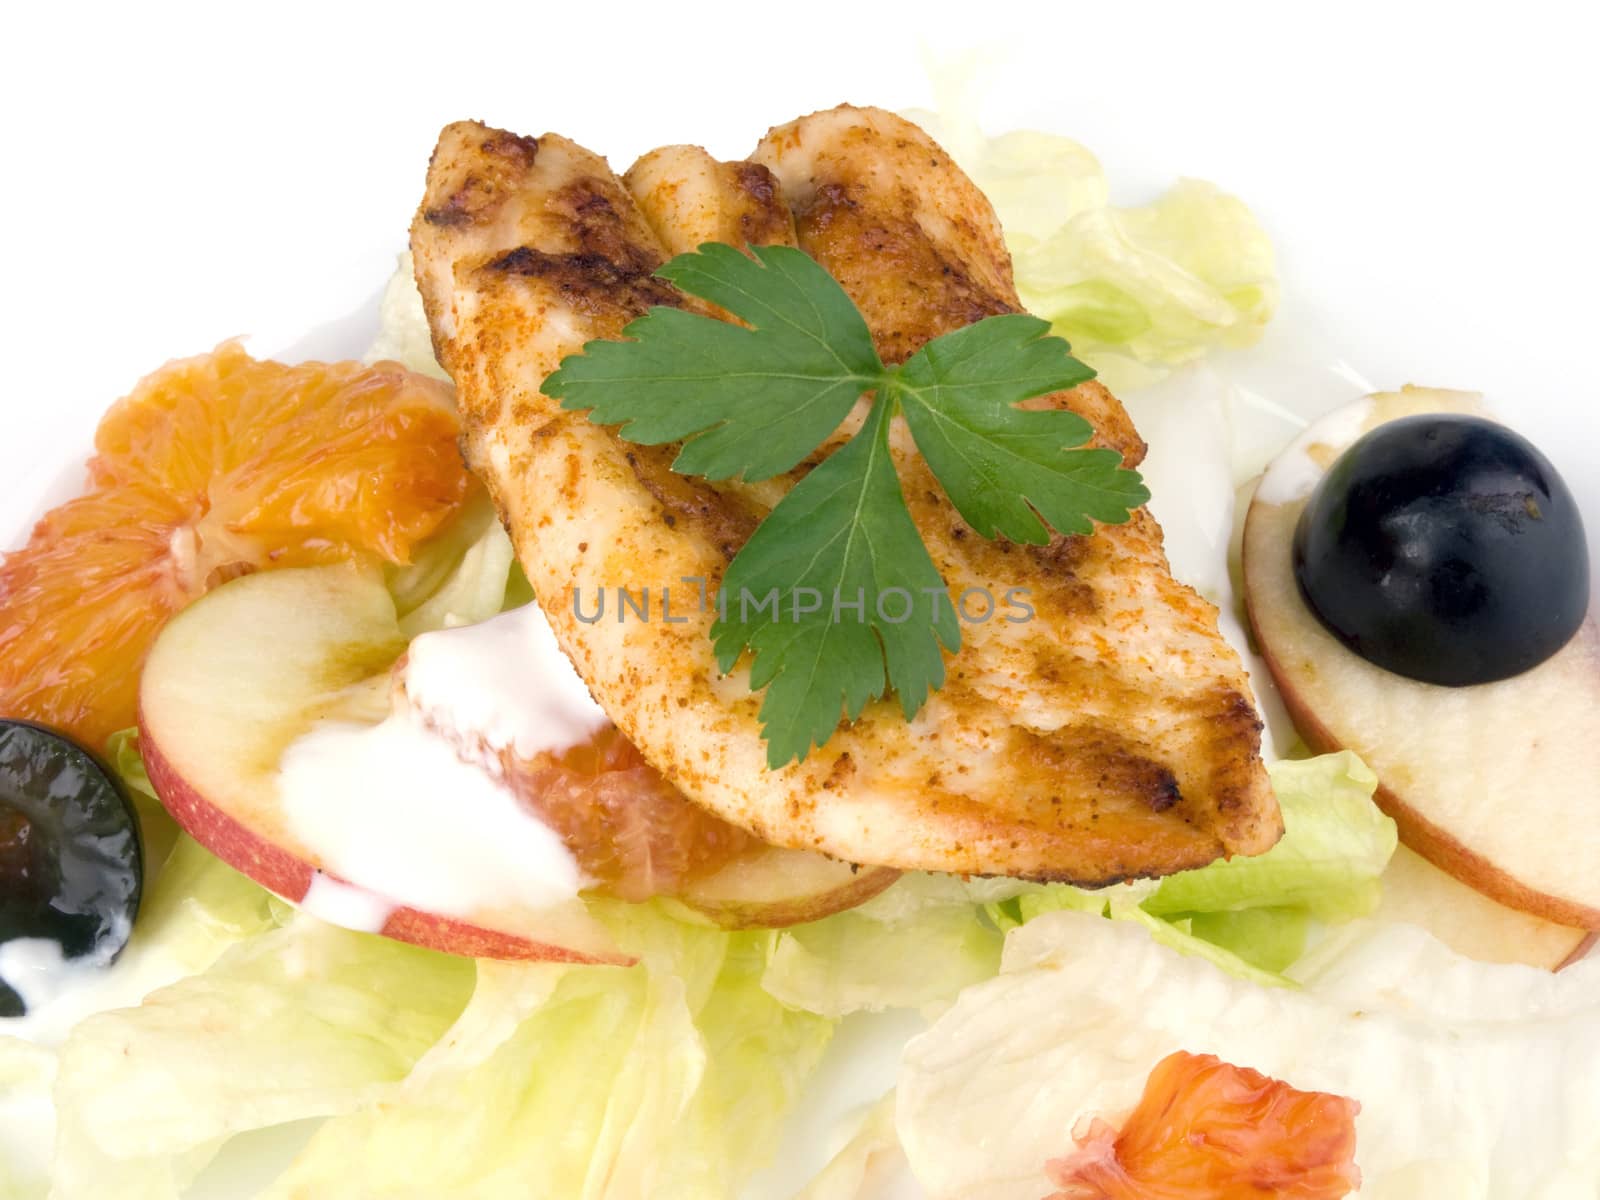 Grilled chicken breast with salad and low fat yogurt dressing on white plate